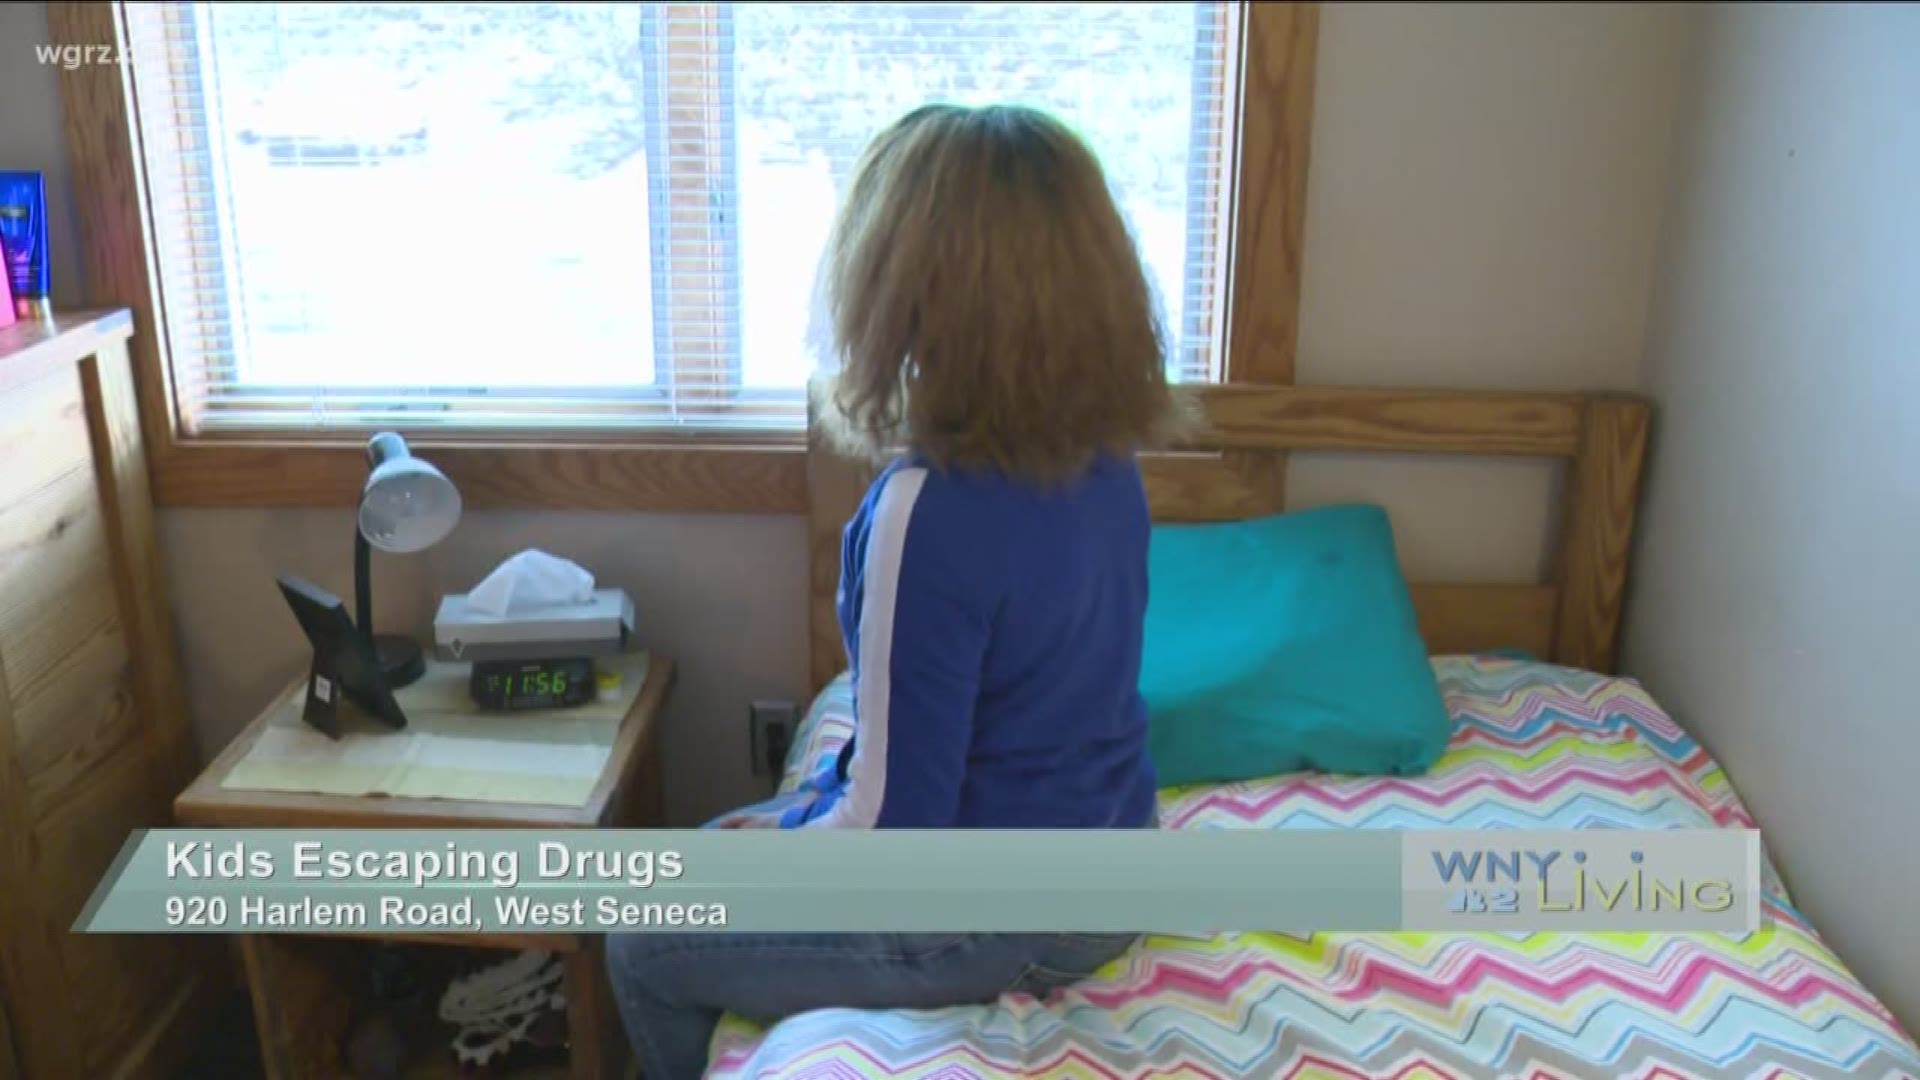 WNY Living - January 21 - Kids Escaping Drugs